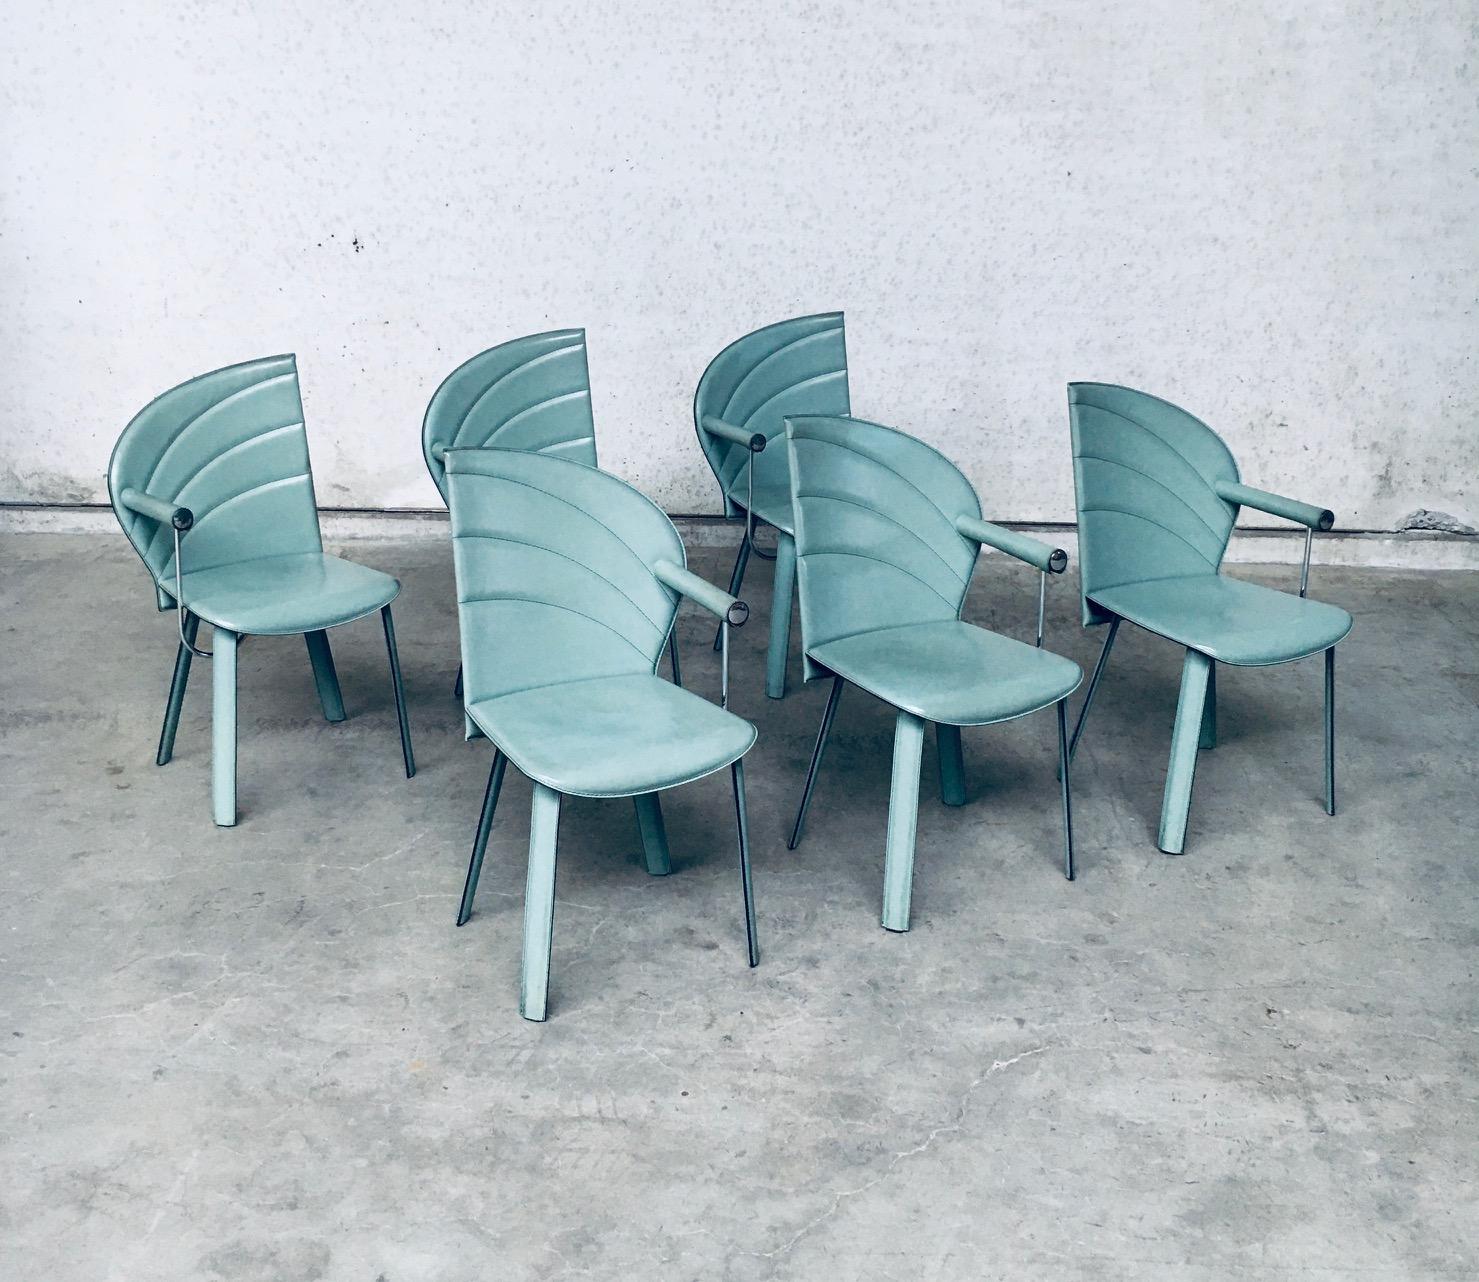 Vintage Postmodern Italian Design Leather covered Dining Chair set of 6 by Mario Morbidelli for Naos. Made in Italy, 1980's. Petrol green color leather on metal frame. 3 chairs have a left armrest, 3 have a right armrest. You can place these